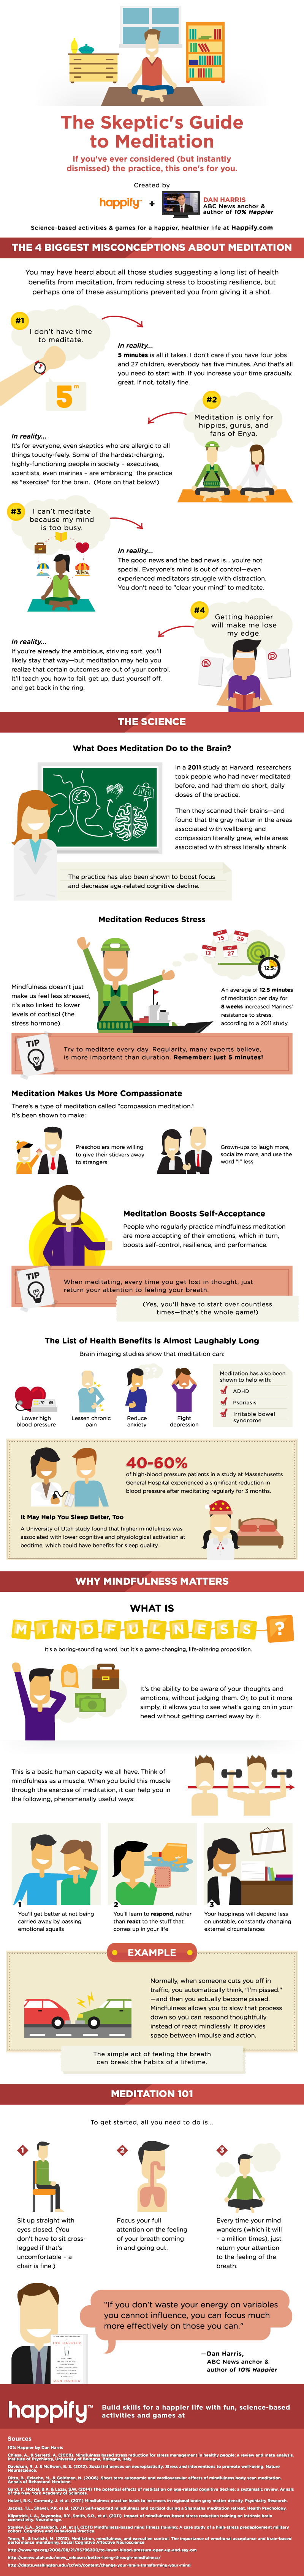 The Skeptic's Guide to Meditation (Infographic) | Happify